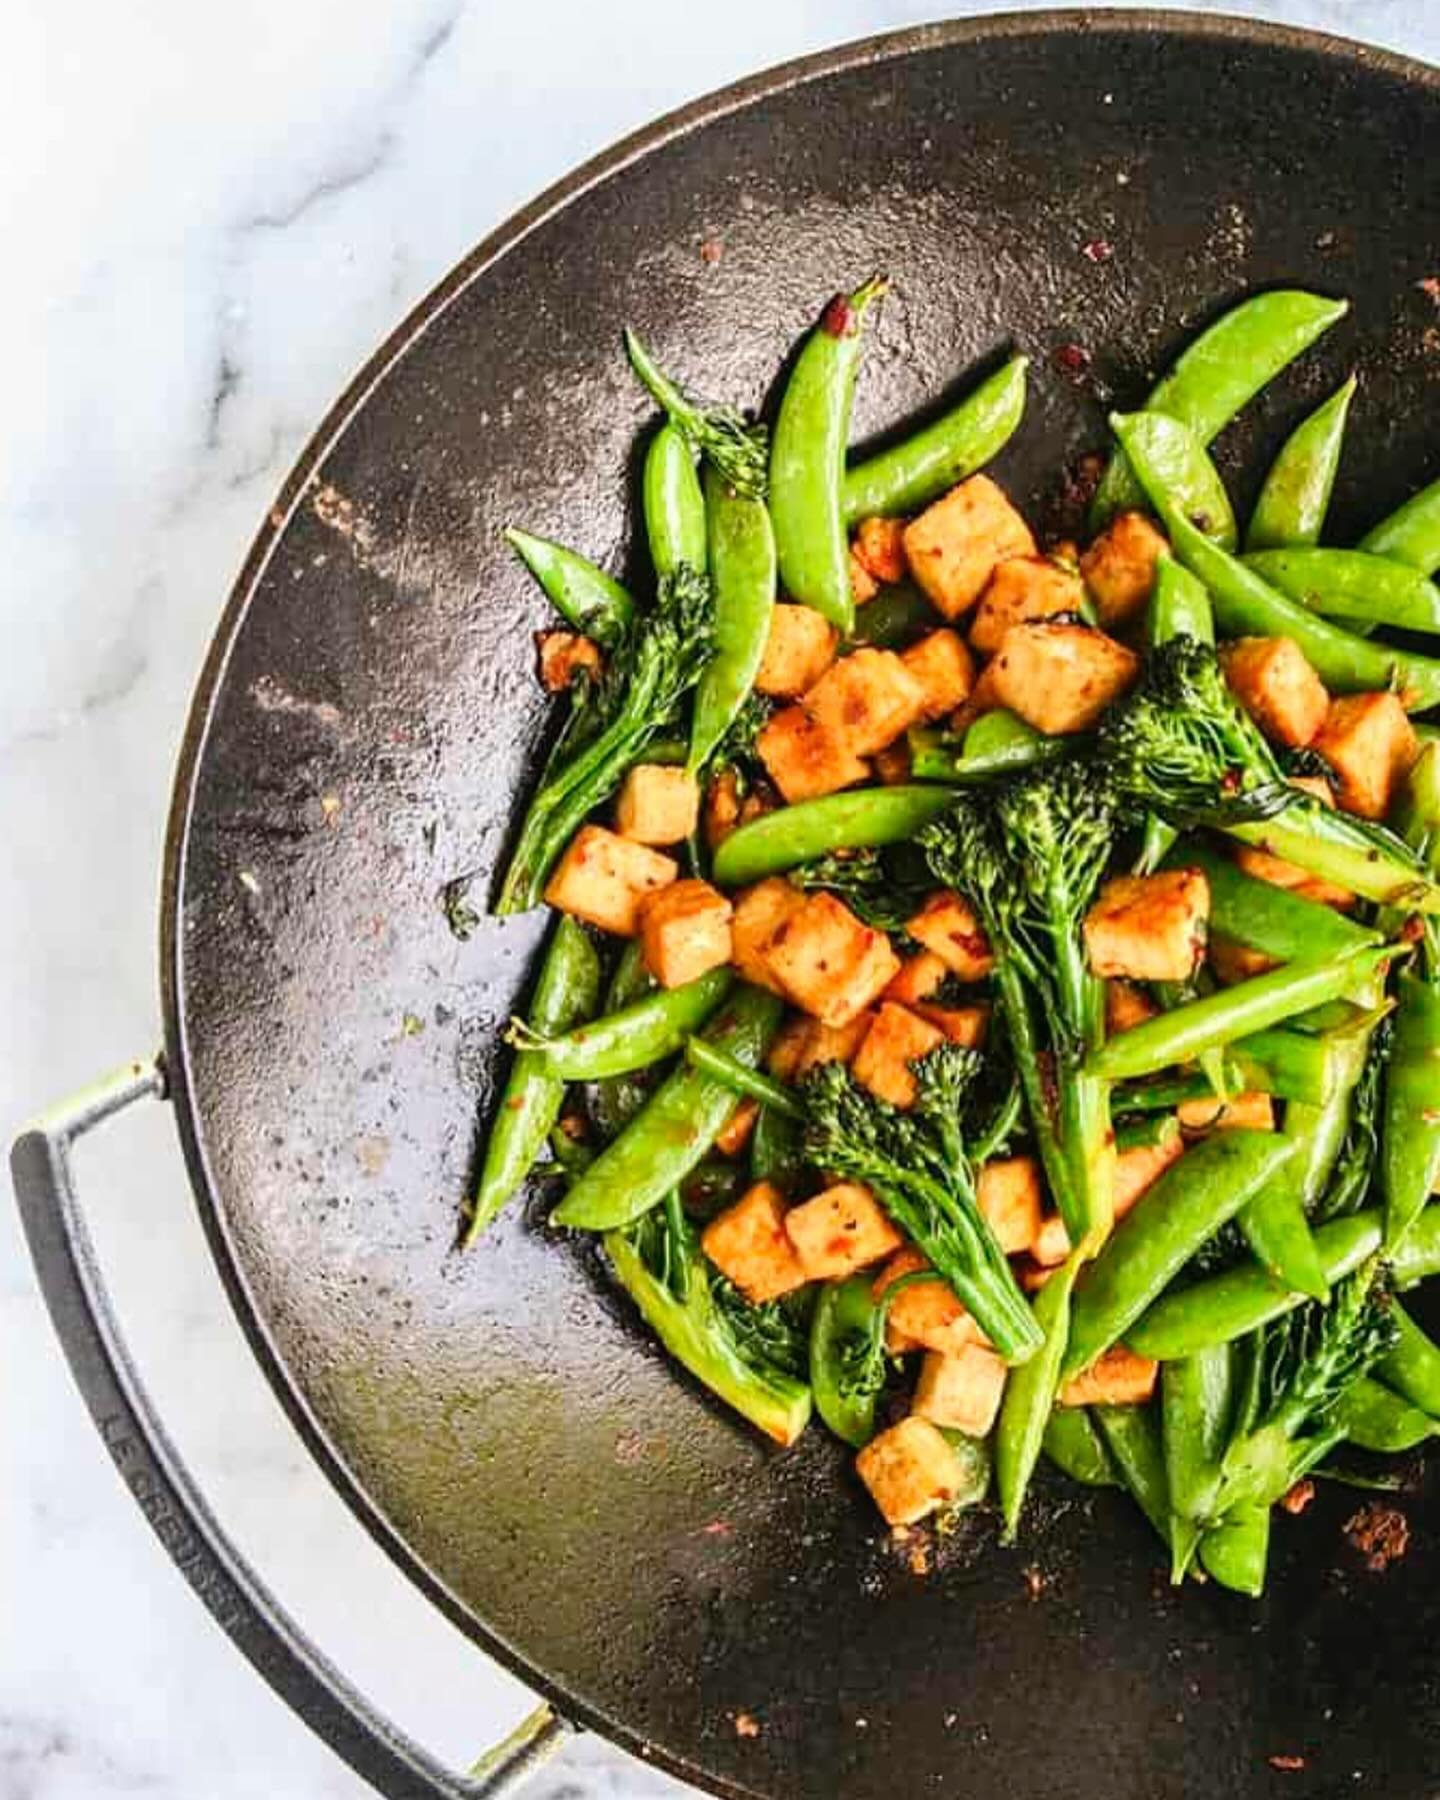 BEAUTIFUL FOOD BY DESIGN | In a hurry? Fire up the work for Spicy Stir-fried Tofu with Broccolini and Snap Peas. Dinner in 15 minutes, always a little jewel.

TAP BIO FOR LINK
https://bijouxs.com/spicy-stir-fried-tofu-with-broccolini-snap-peas/
.
.
.